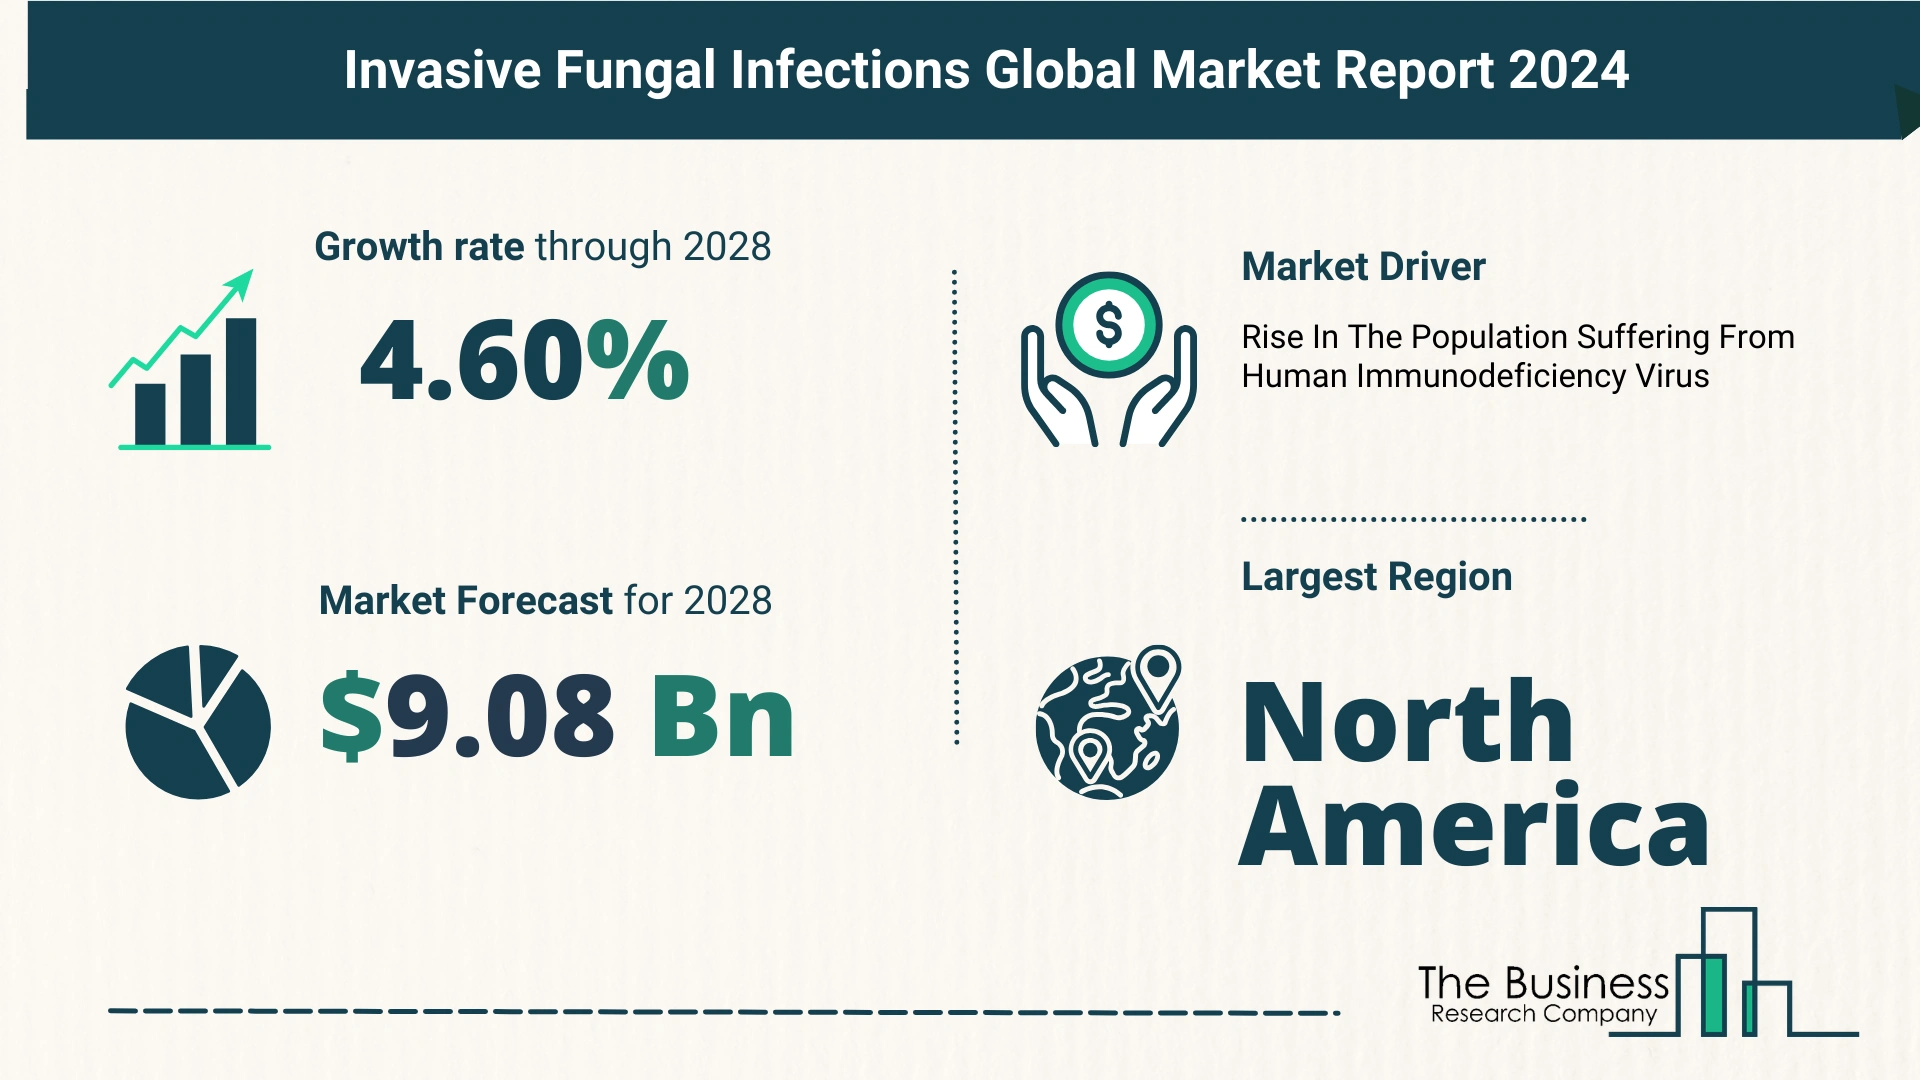 Global Invasive Fungal Infections Market